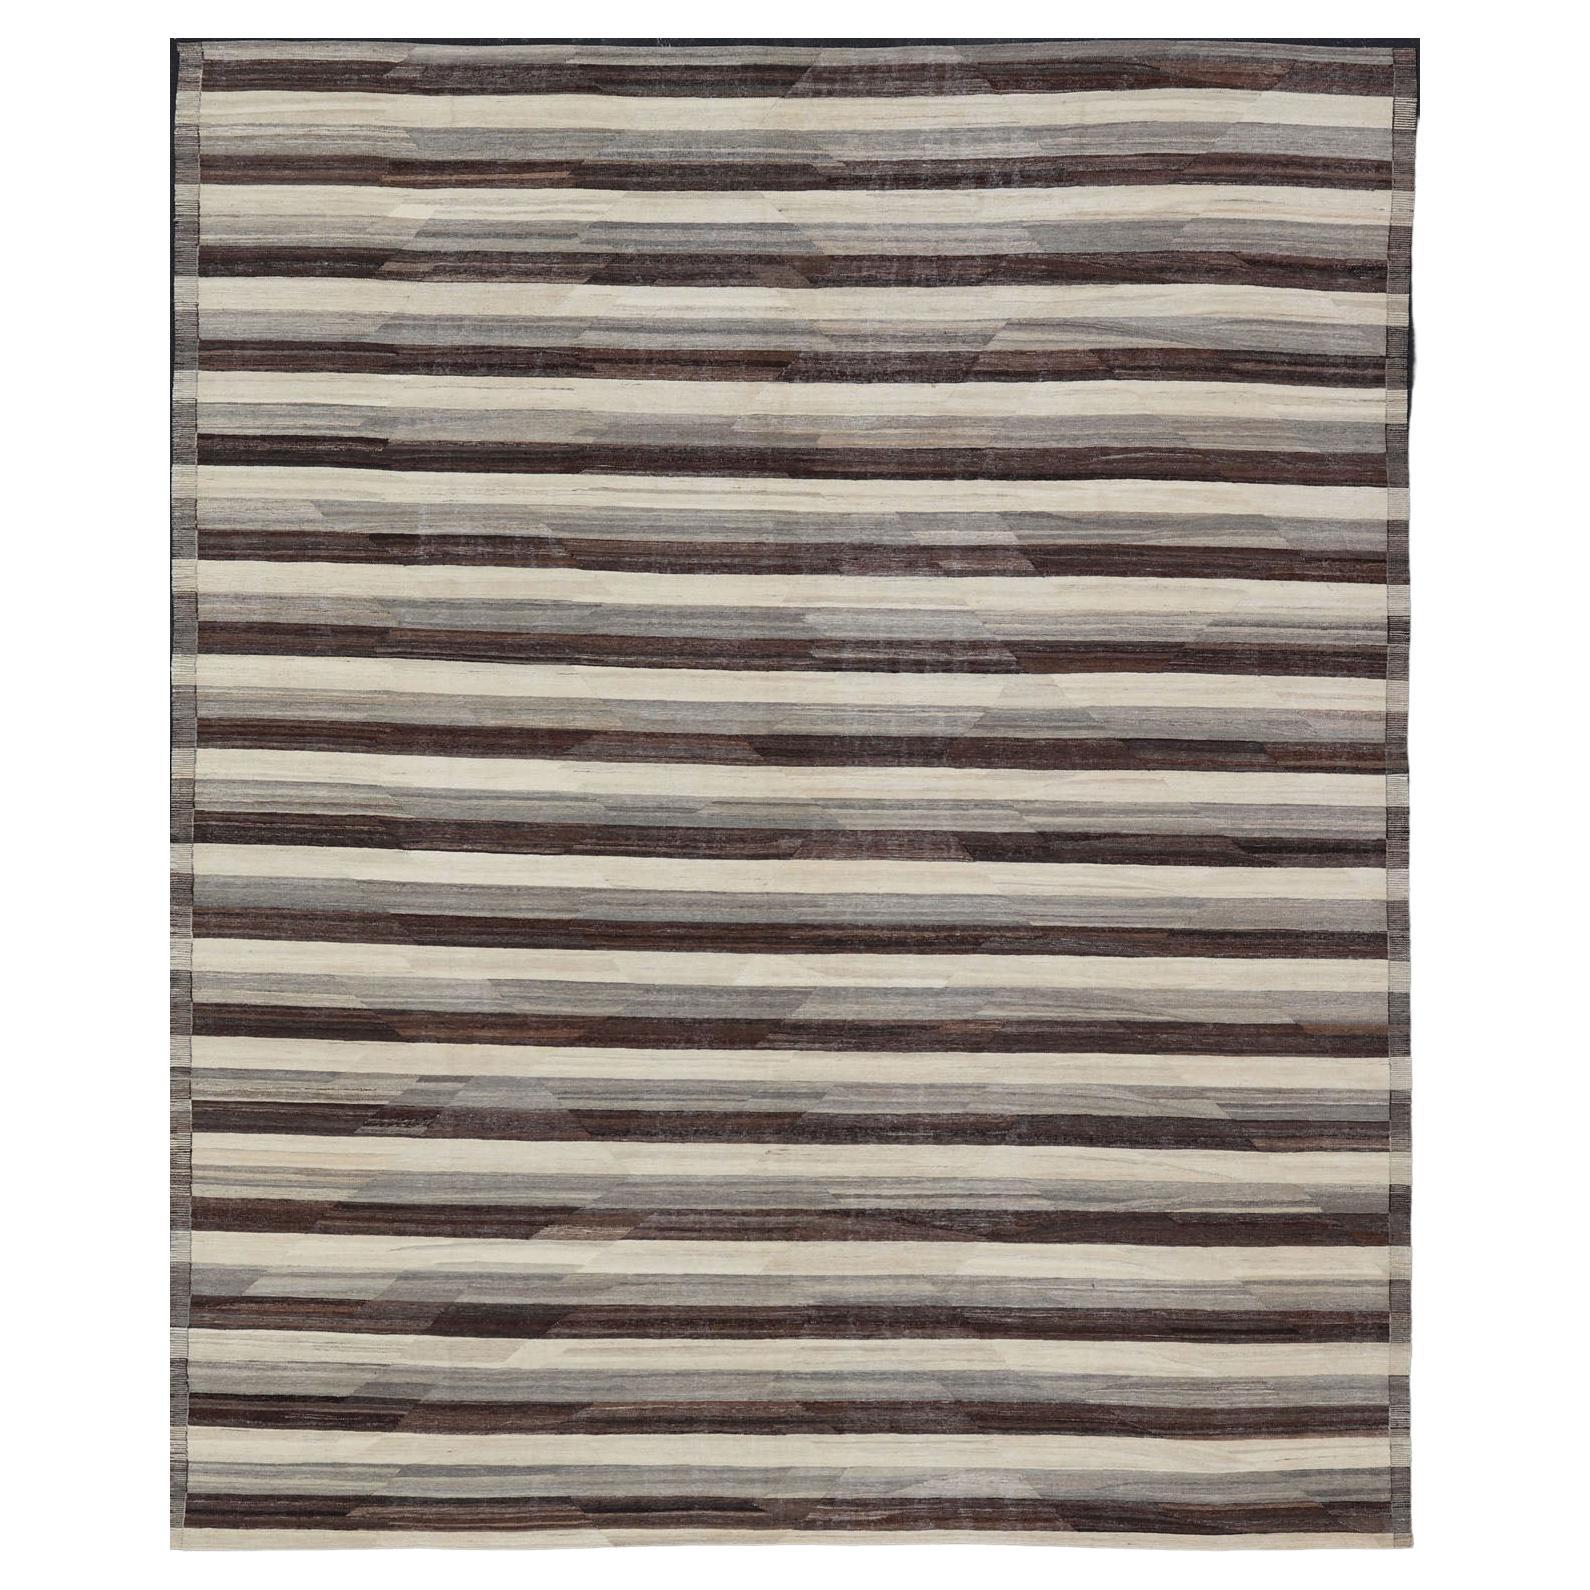 Large Hand-Woven Flat Weave Kilim in Cream, Taupe, and Dark Walnut